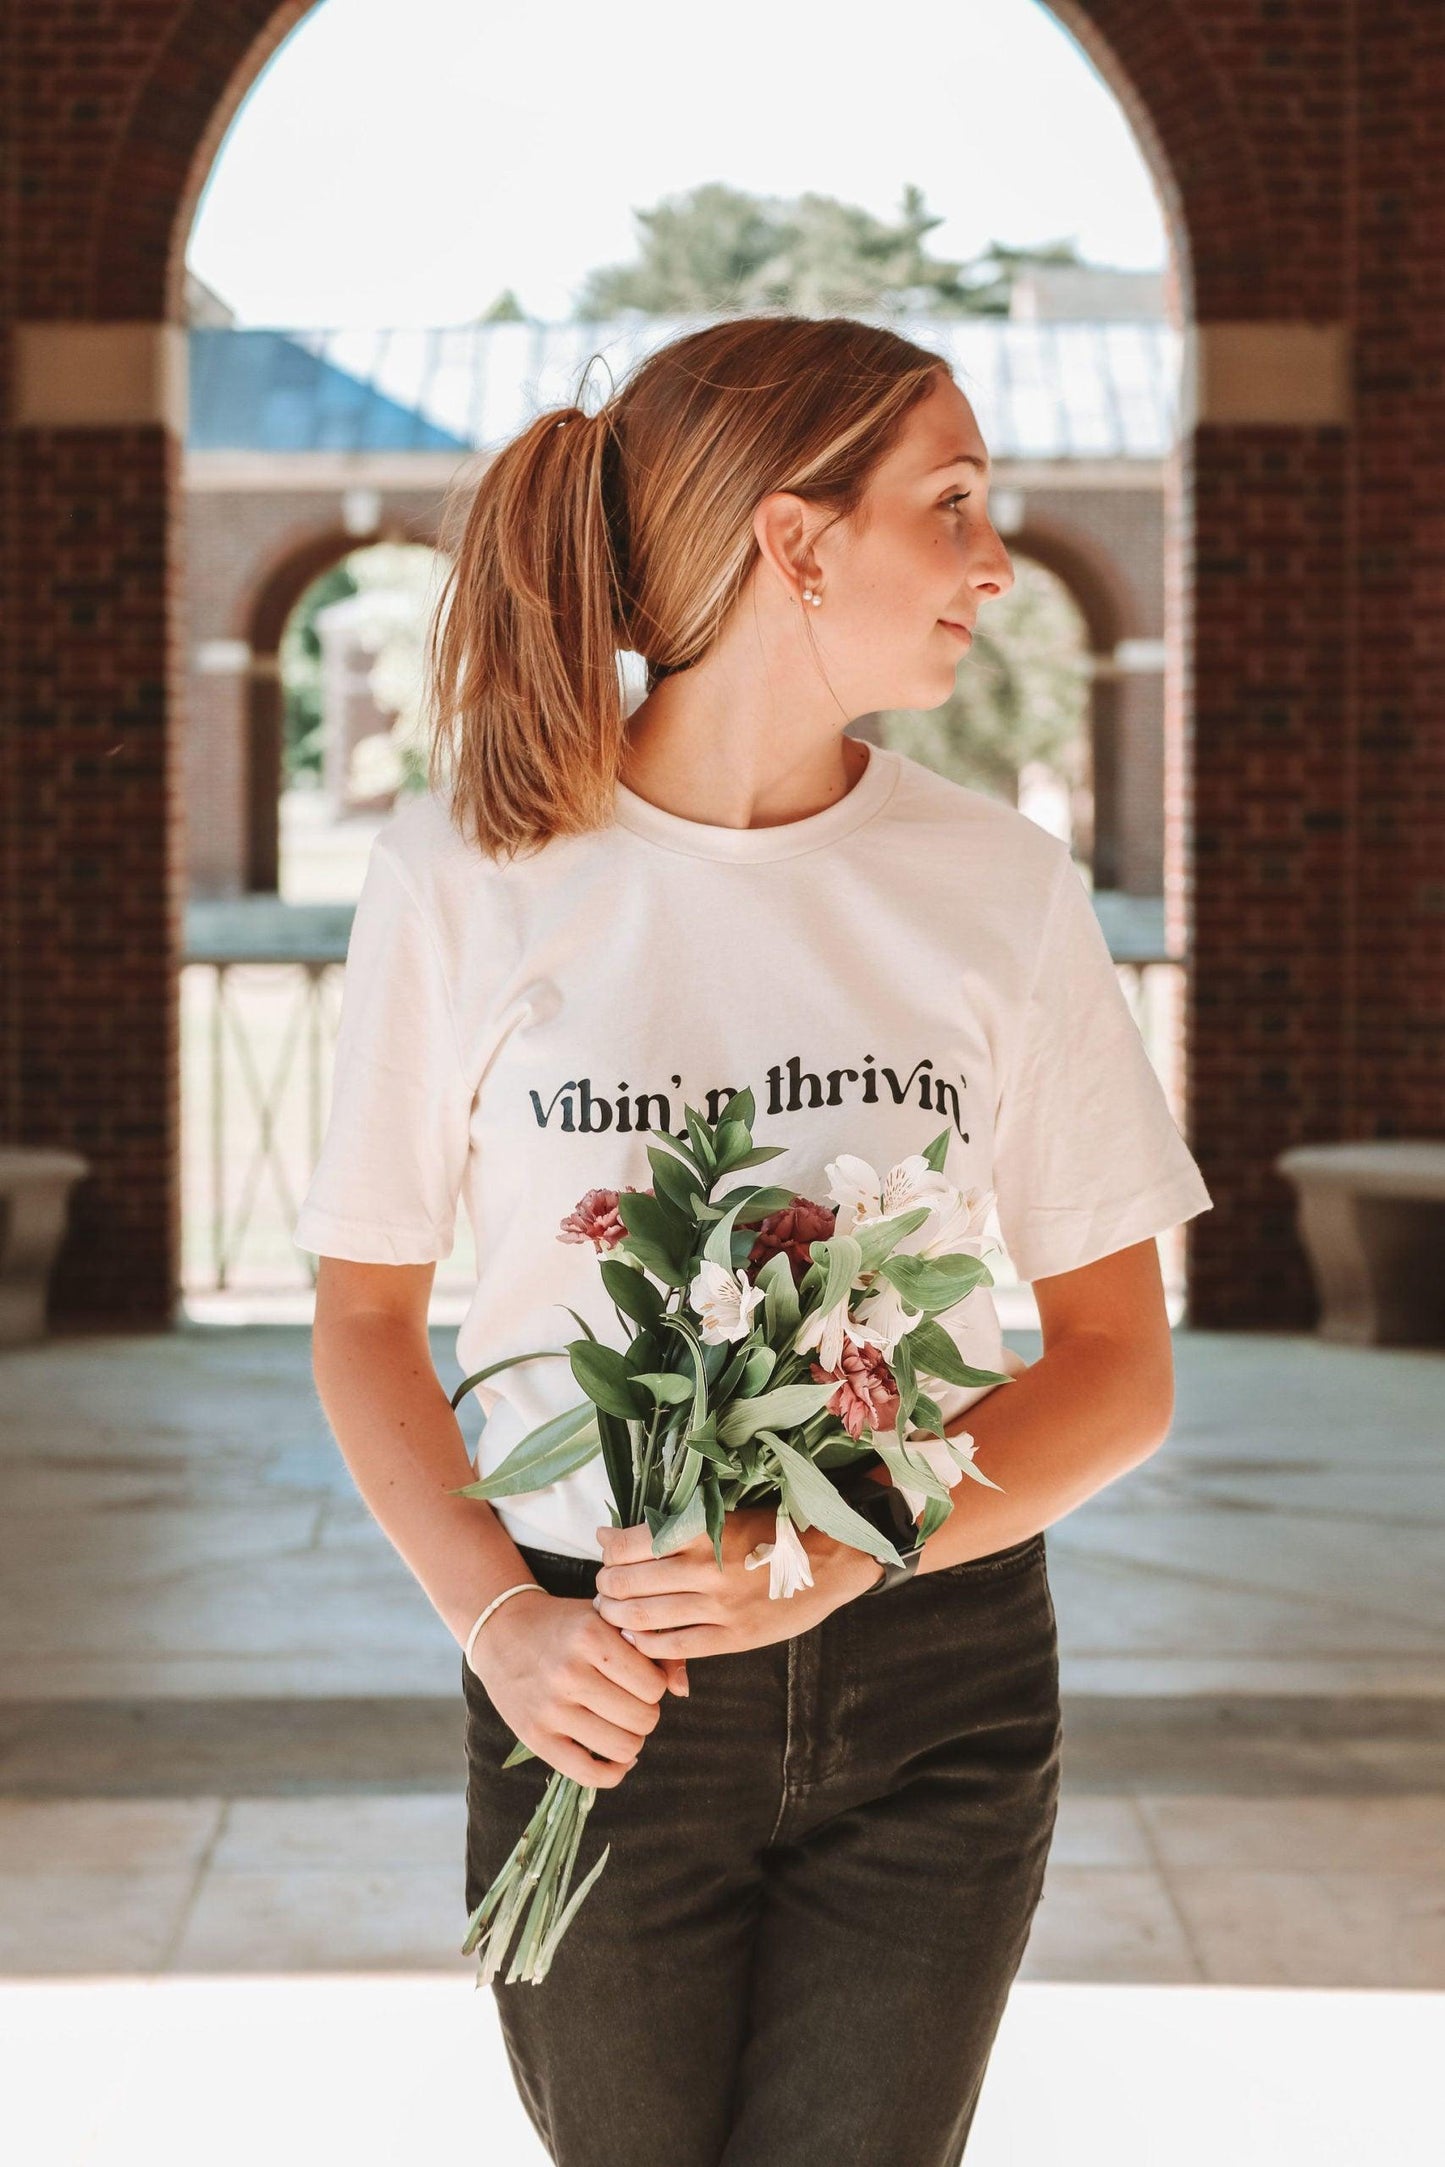 A photo of a girl with her hair clipped up, holding white and purple flowers. She is wearing a white short sleeve shirt with "vibin' n thivin'" printed in black wavy text across the front.